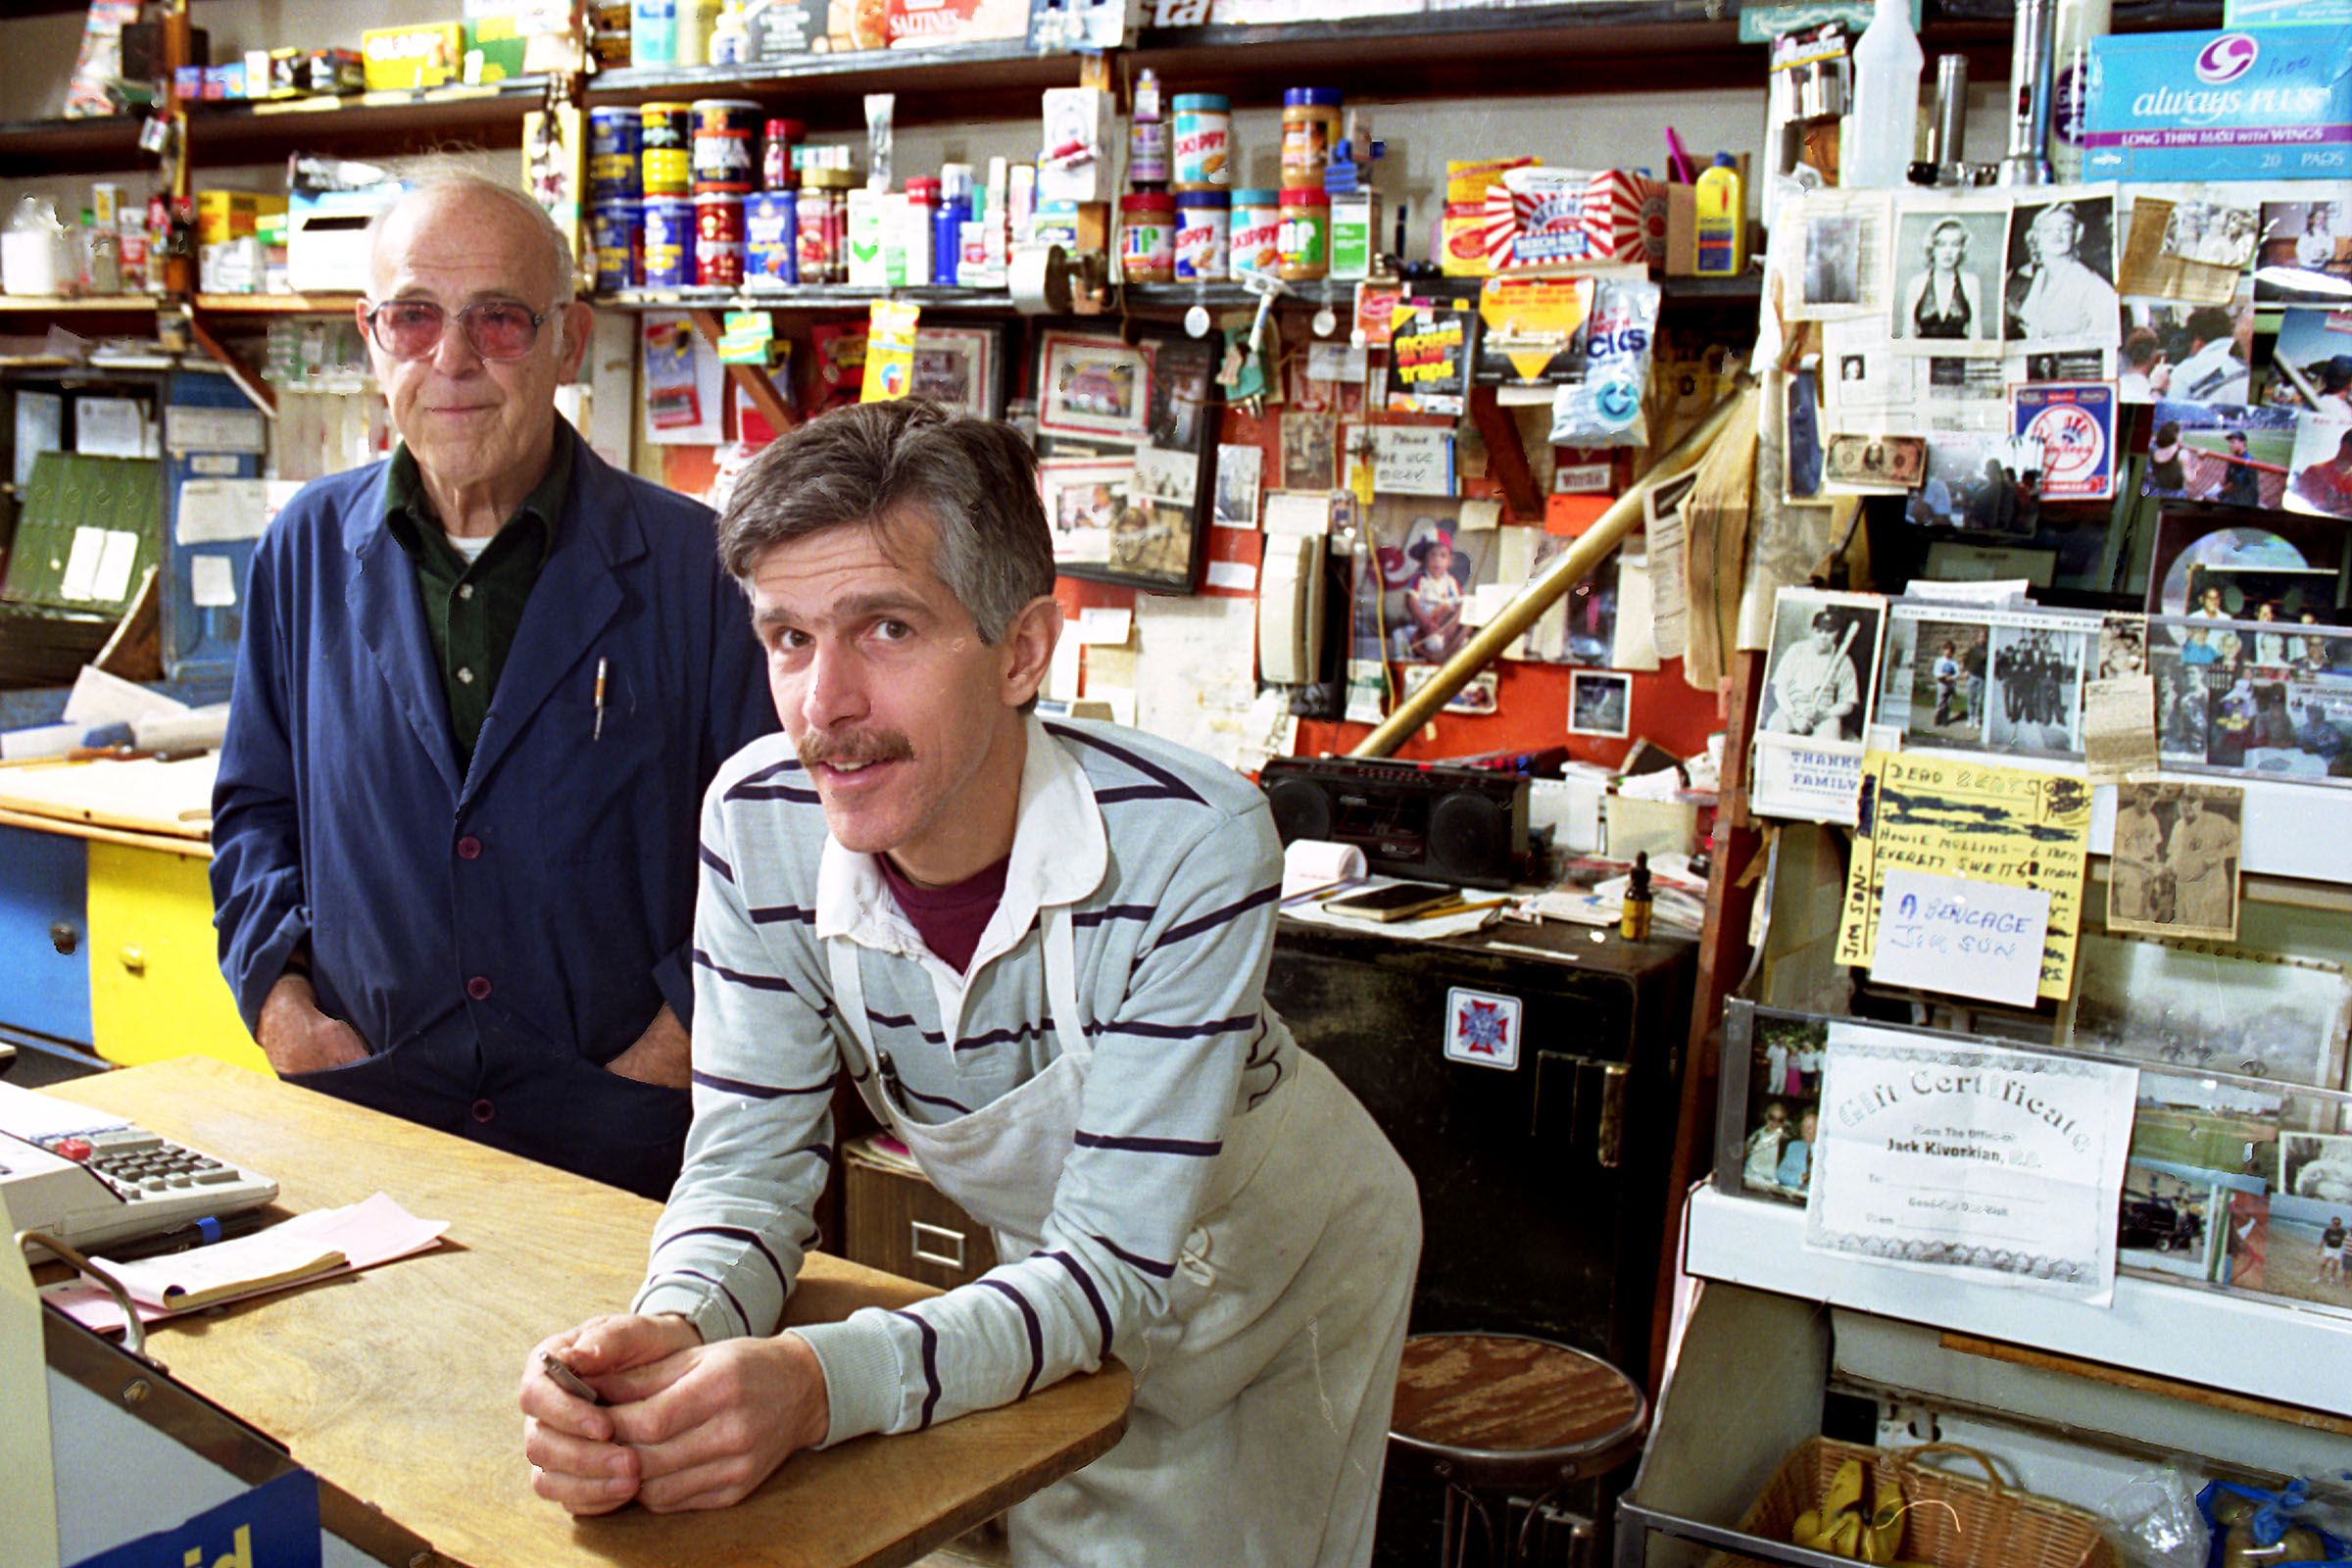 The Falzaranos, Ralph Sr. and Ralph Jr., are photographed at Progressive Market, their White River Junction, Vt., store on Oct. 25, 1993. The younger Falzarano was looking to revamp the 75-year-old market to serve Italian foods as a long-overdue tribute to the local Italian community on South Main Street. (Valley News - Medora Hebert) Copyright Valley News. May not be reprinted or used online without permission. Send requests to permission@vnews.com.